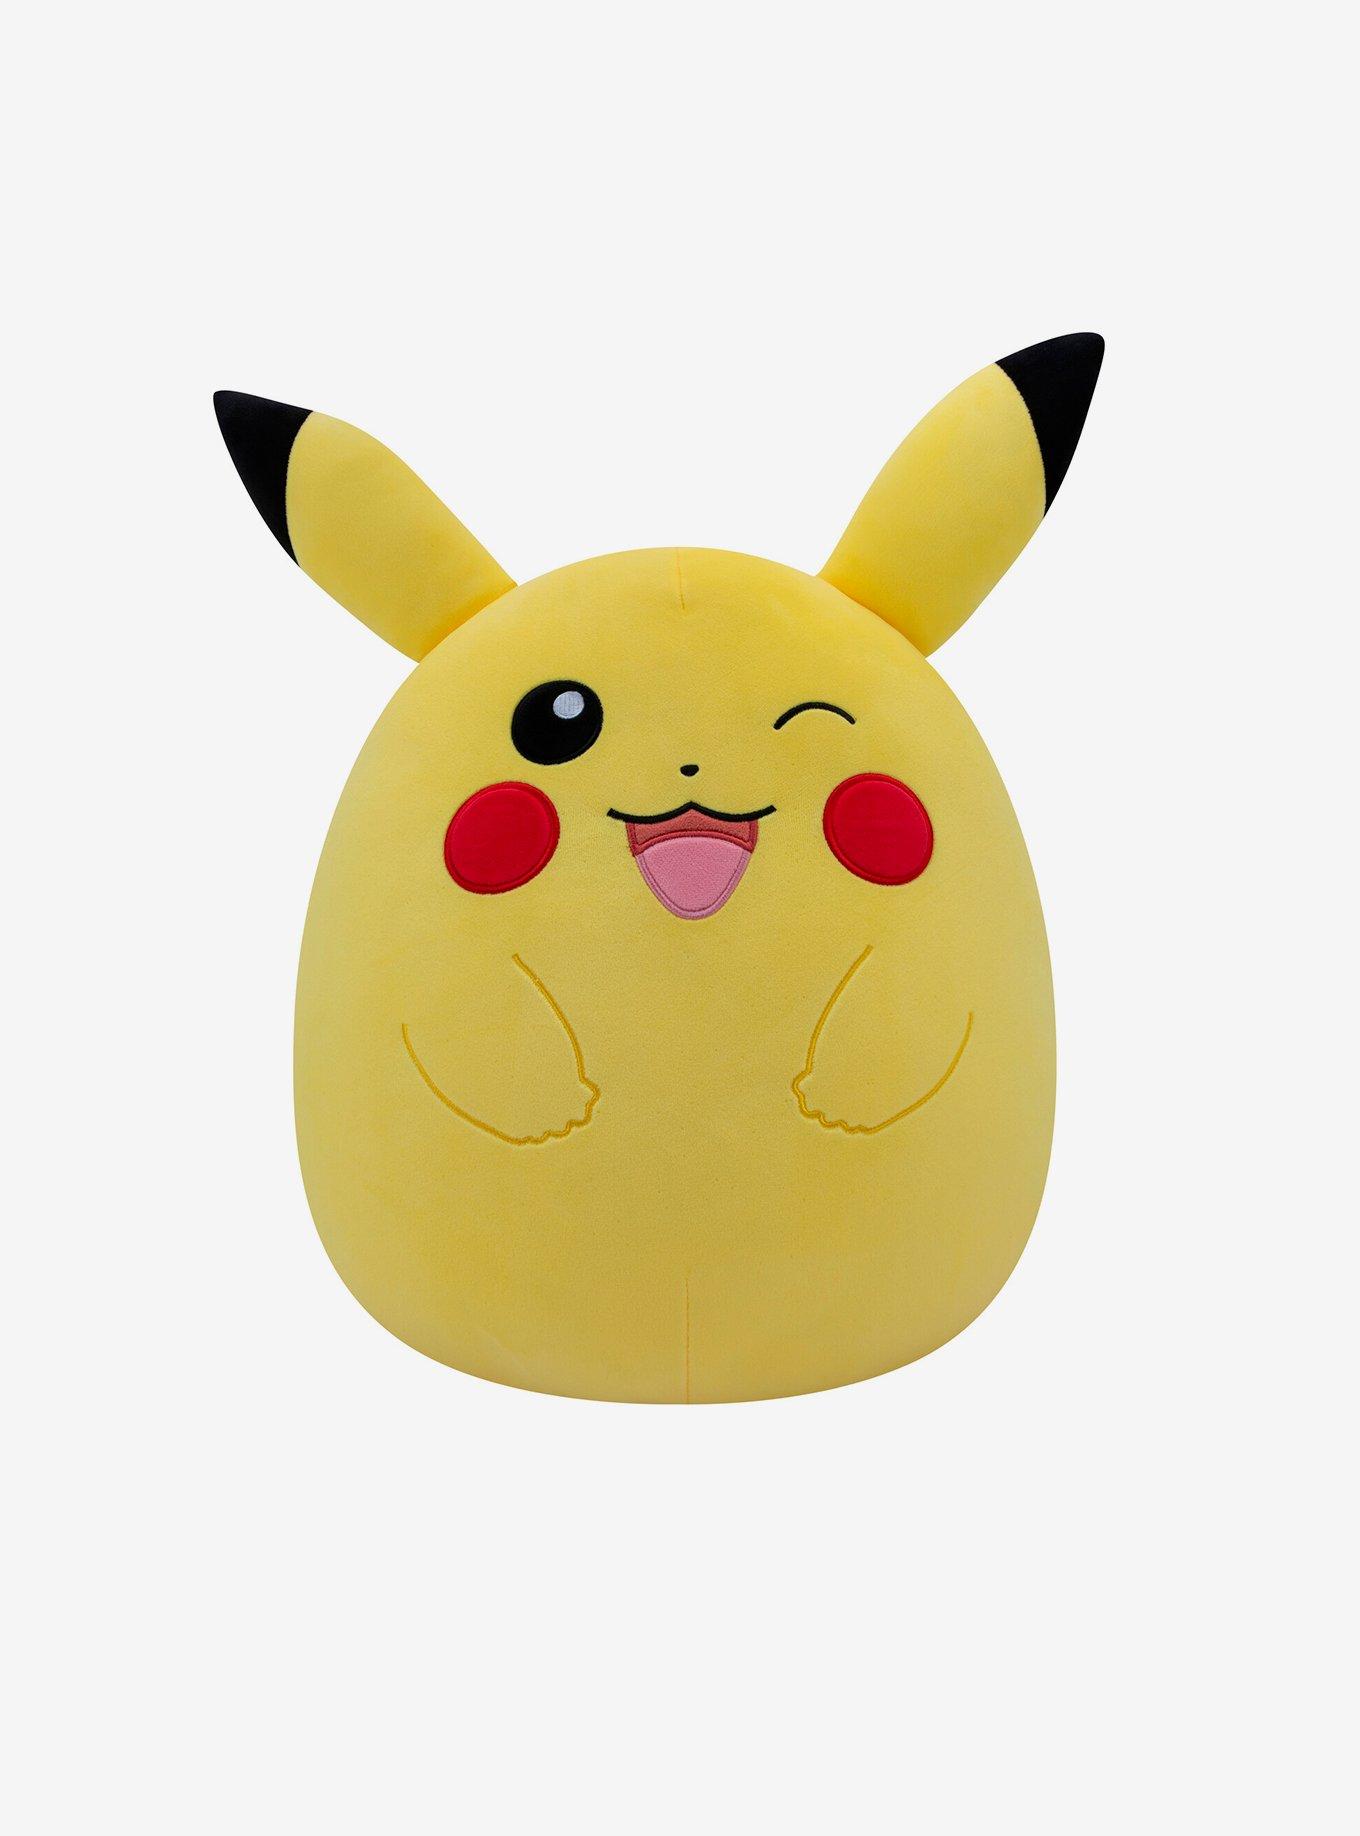 Pokémon Squishmallows are coming: Retailer, varieties and more (UPD)